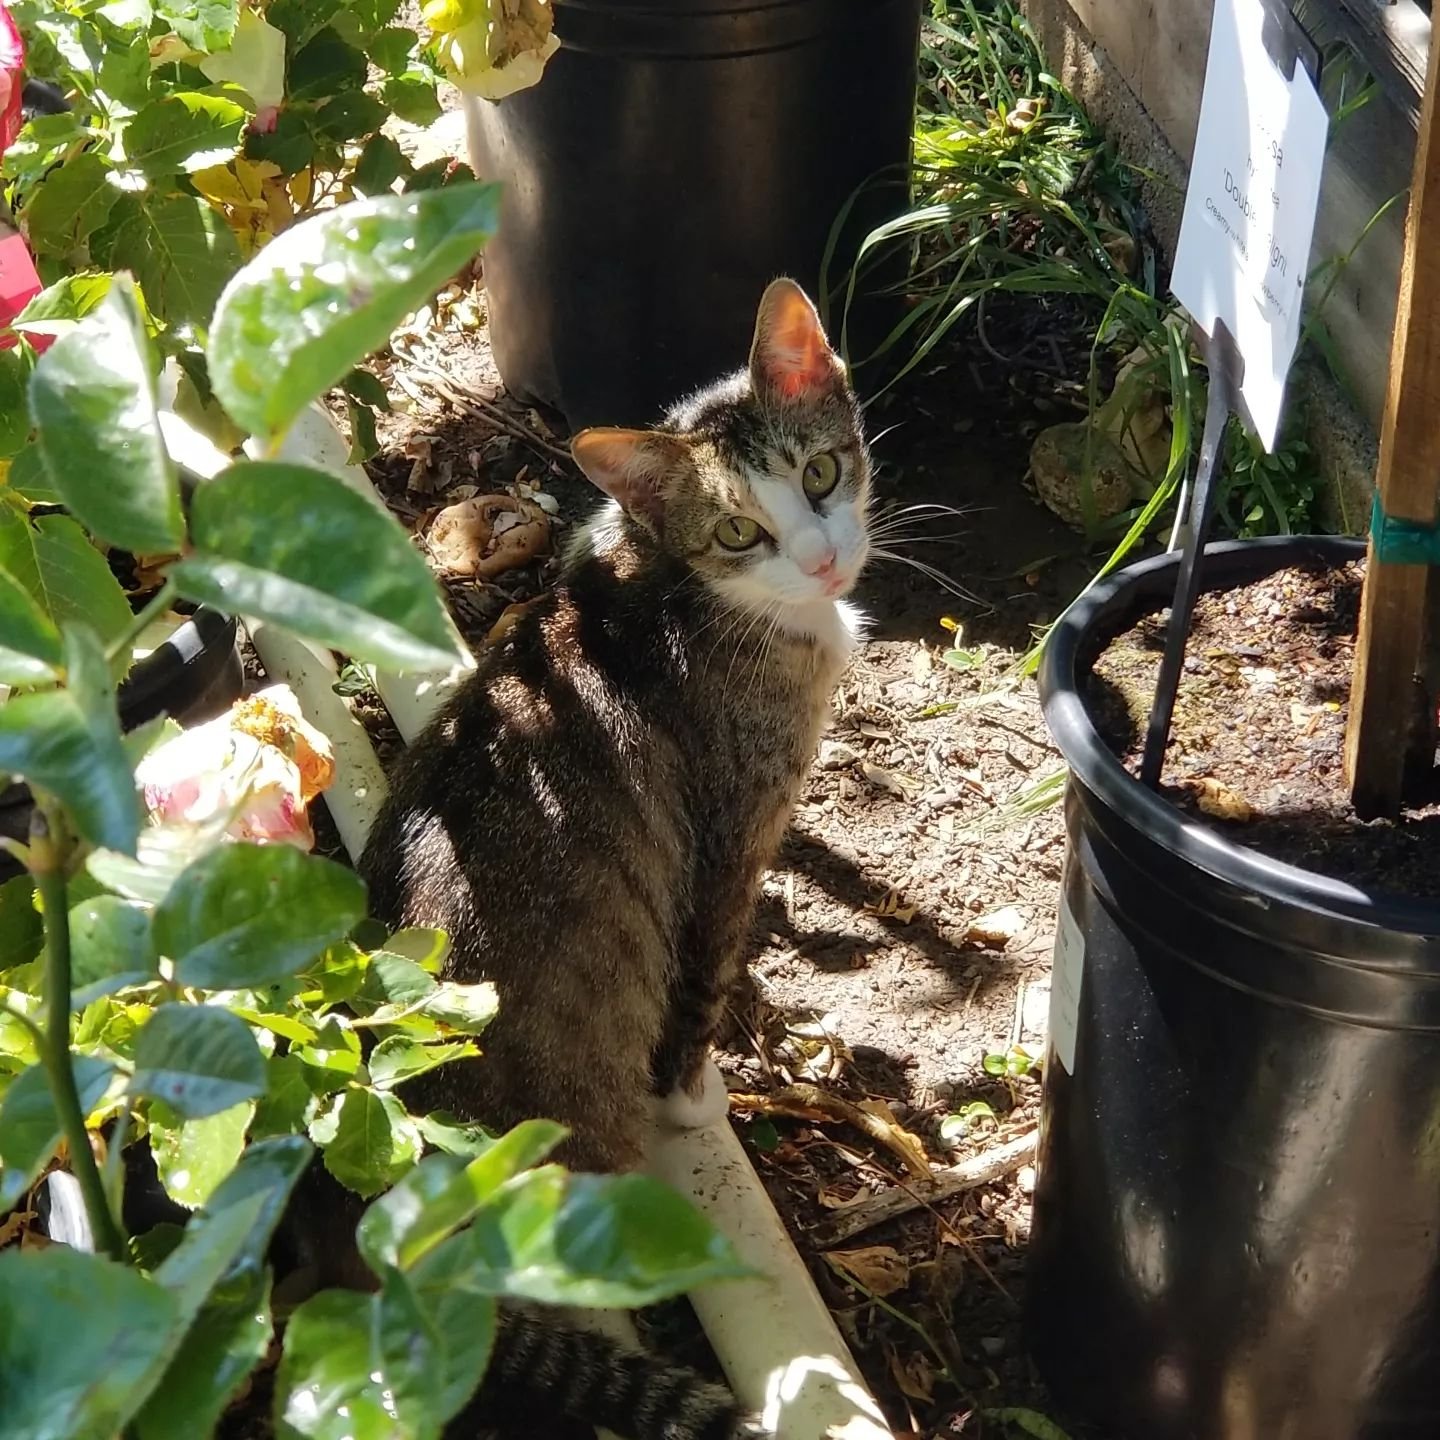 This most darling little kitty loves hanging out amongst the roses! 🌹🐈 What should we name her? 

#capitolwholesalenursery #catstagram #rosegarden #nurserycat